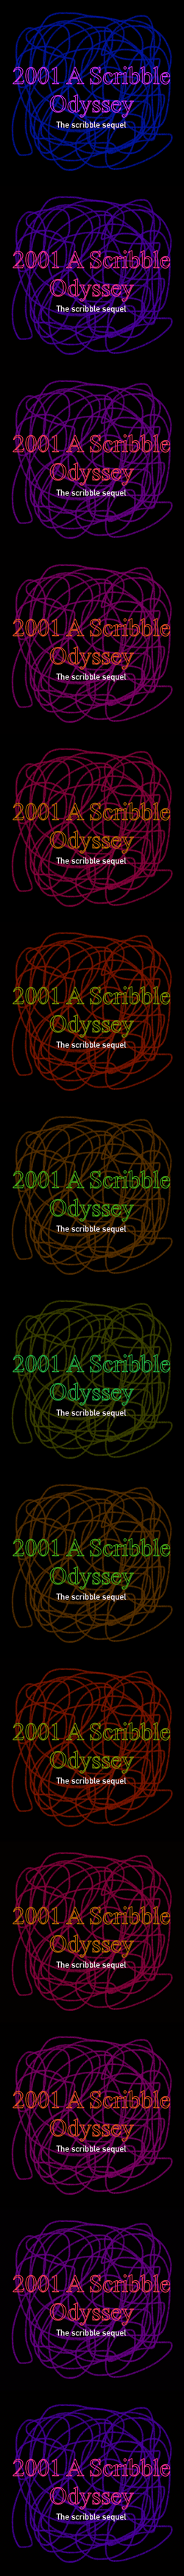 2001 A Scribble Odyssey : the scribble sequel collection image